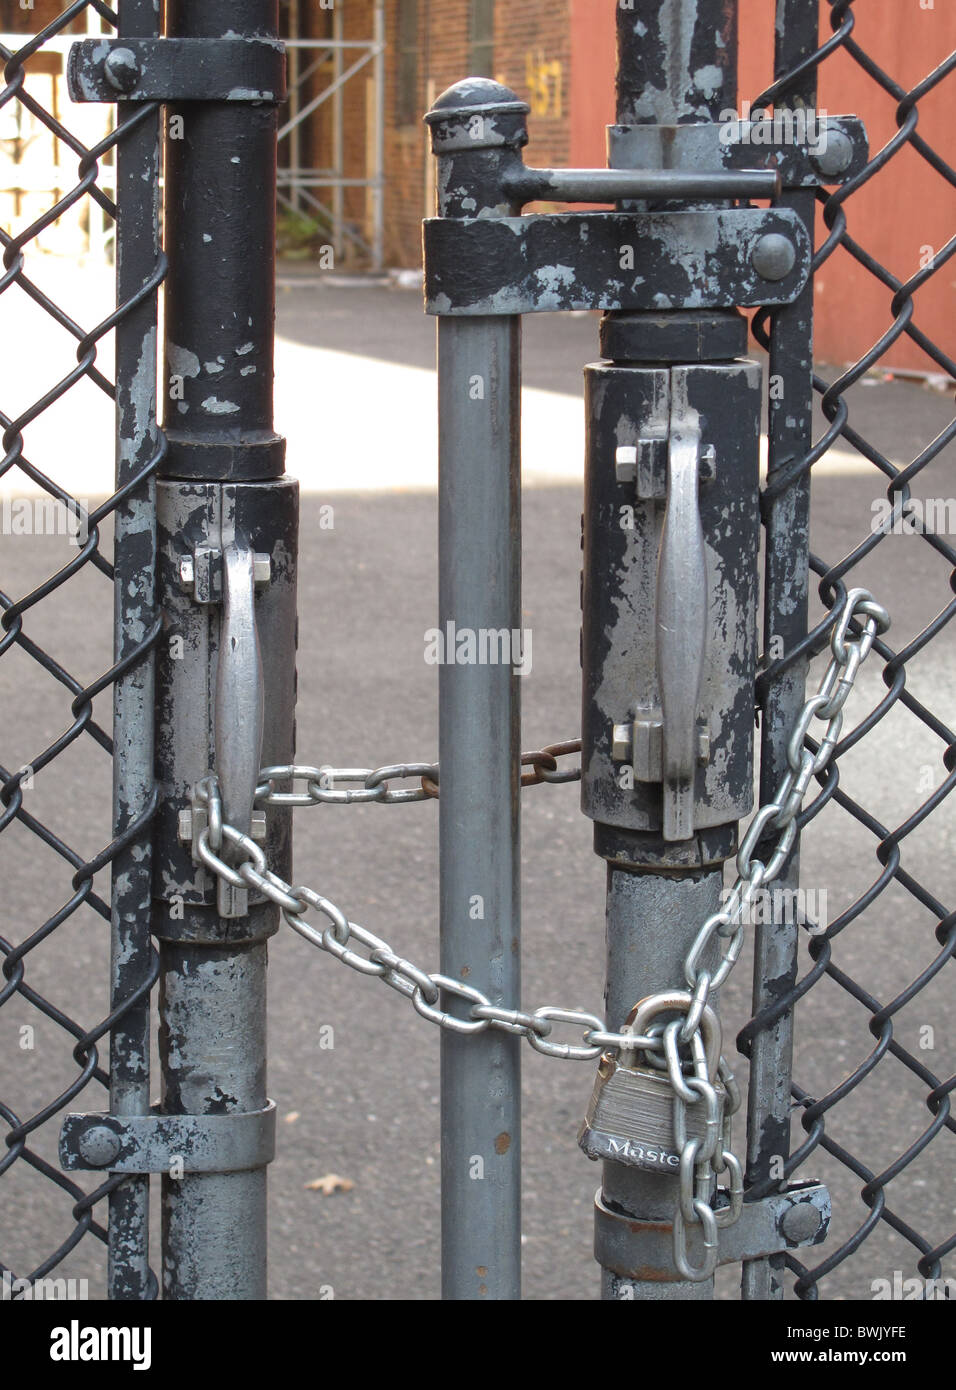 Chained gate for a yard in New York City Stock Photo